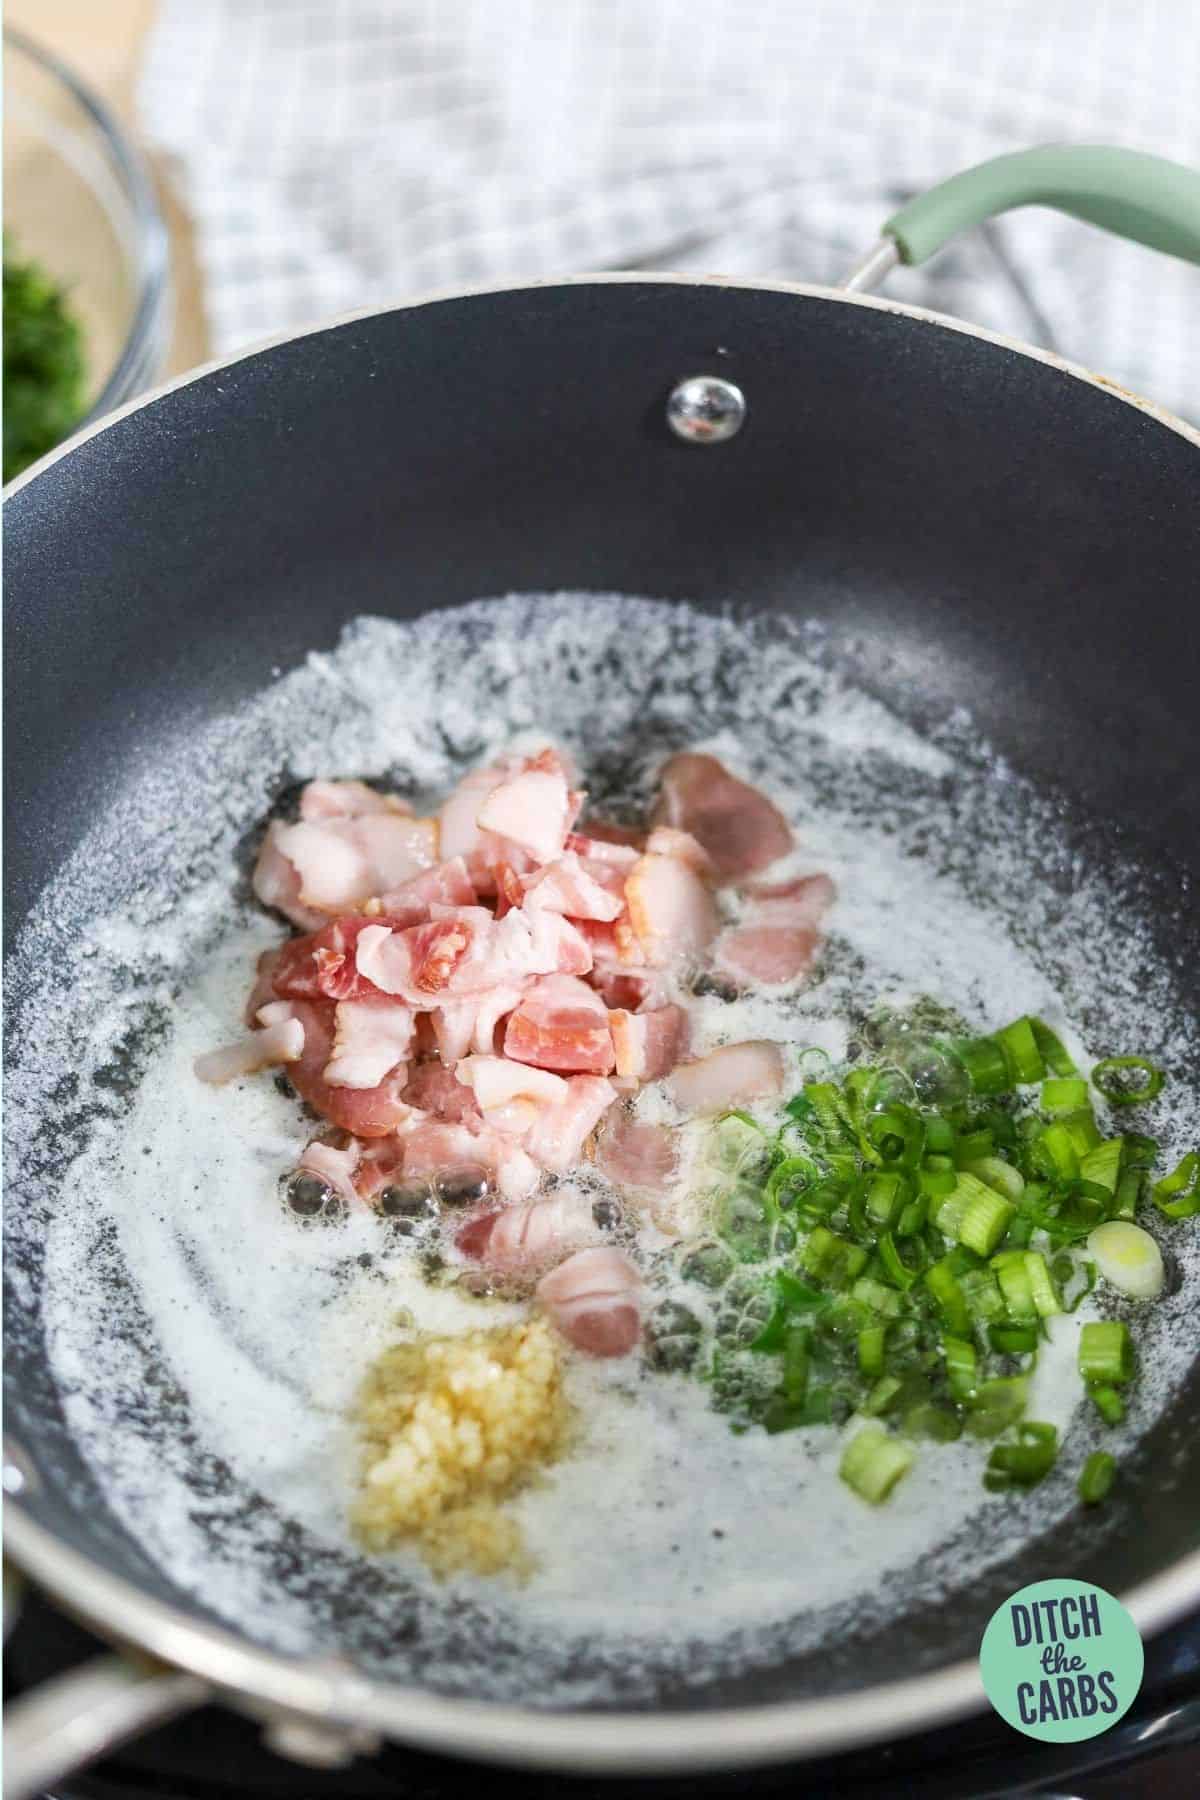 bacon and garlic in a frying pan